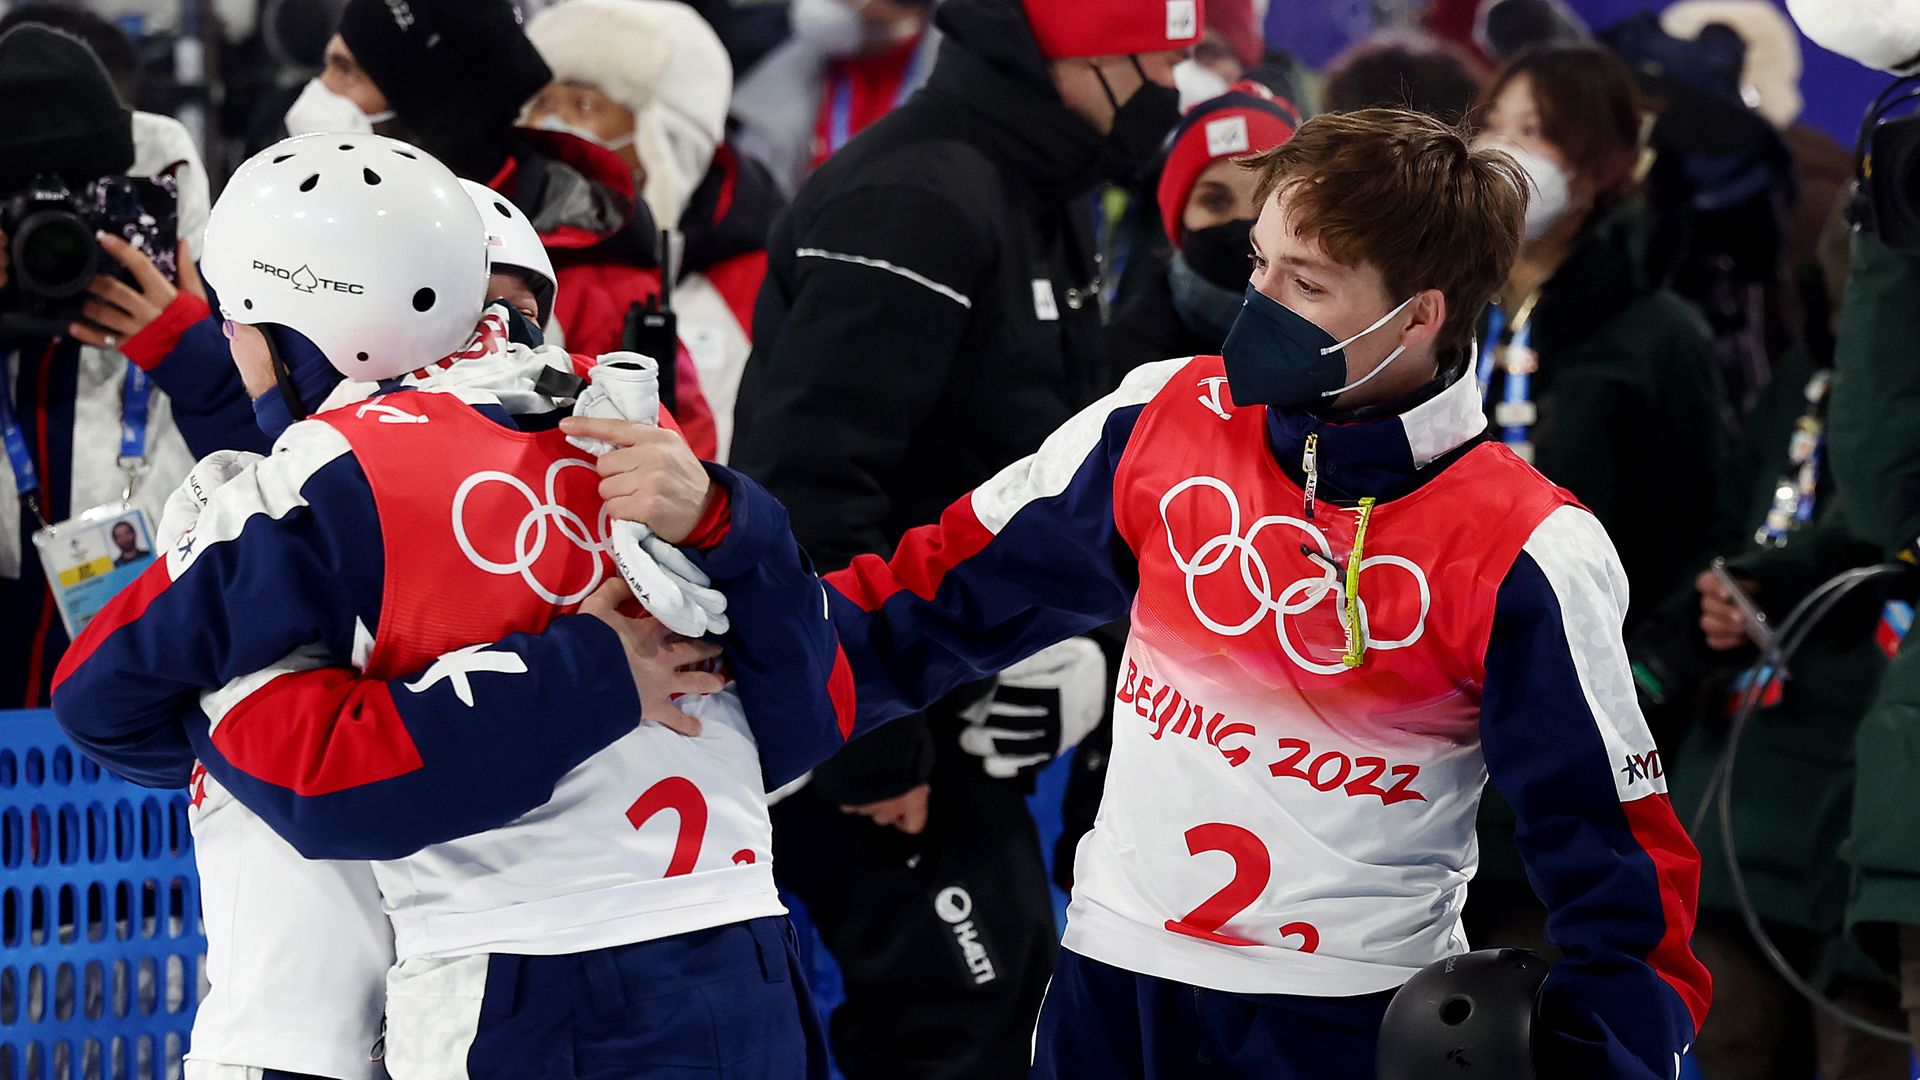 Justin Schoenefeld (C), Ashley Caldwell (L) and Christopher Lillis (R) embracing after winning a gold medal in mixed team aerials in Beijing on Feb. 10.